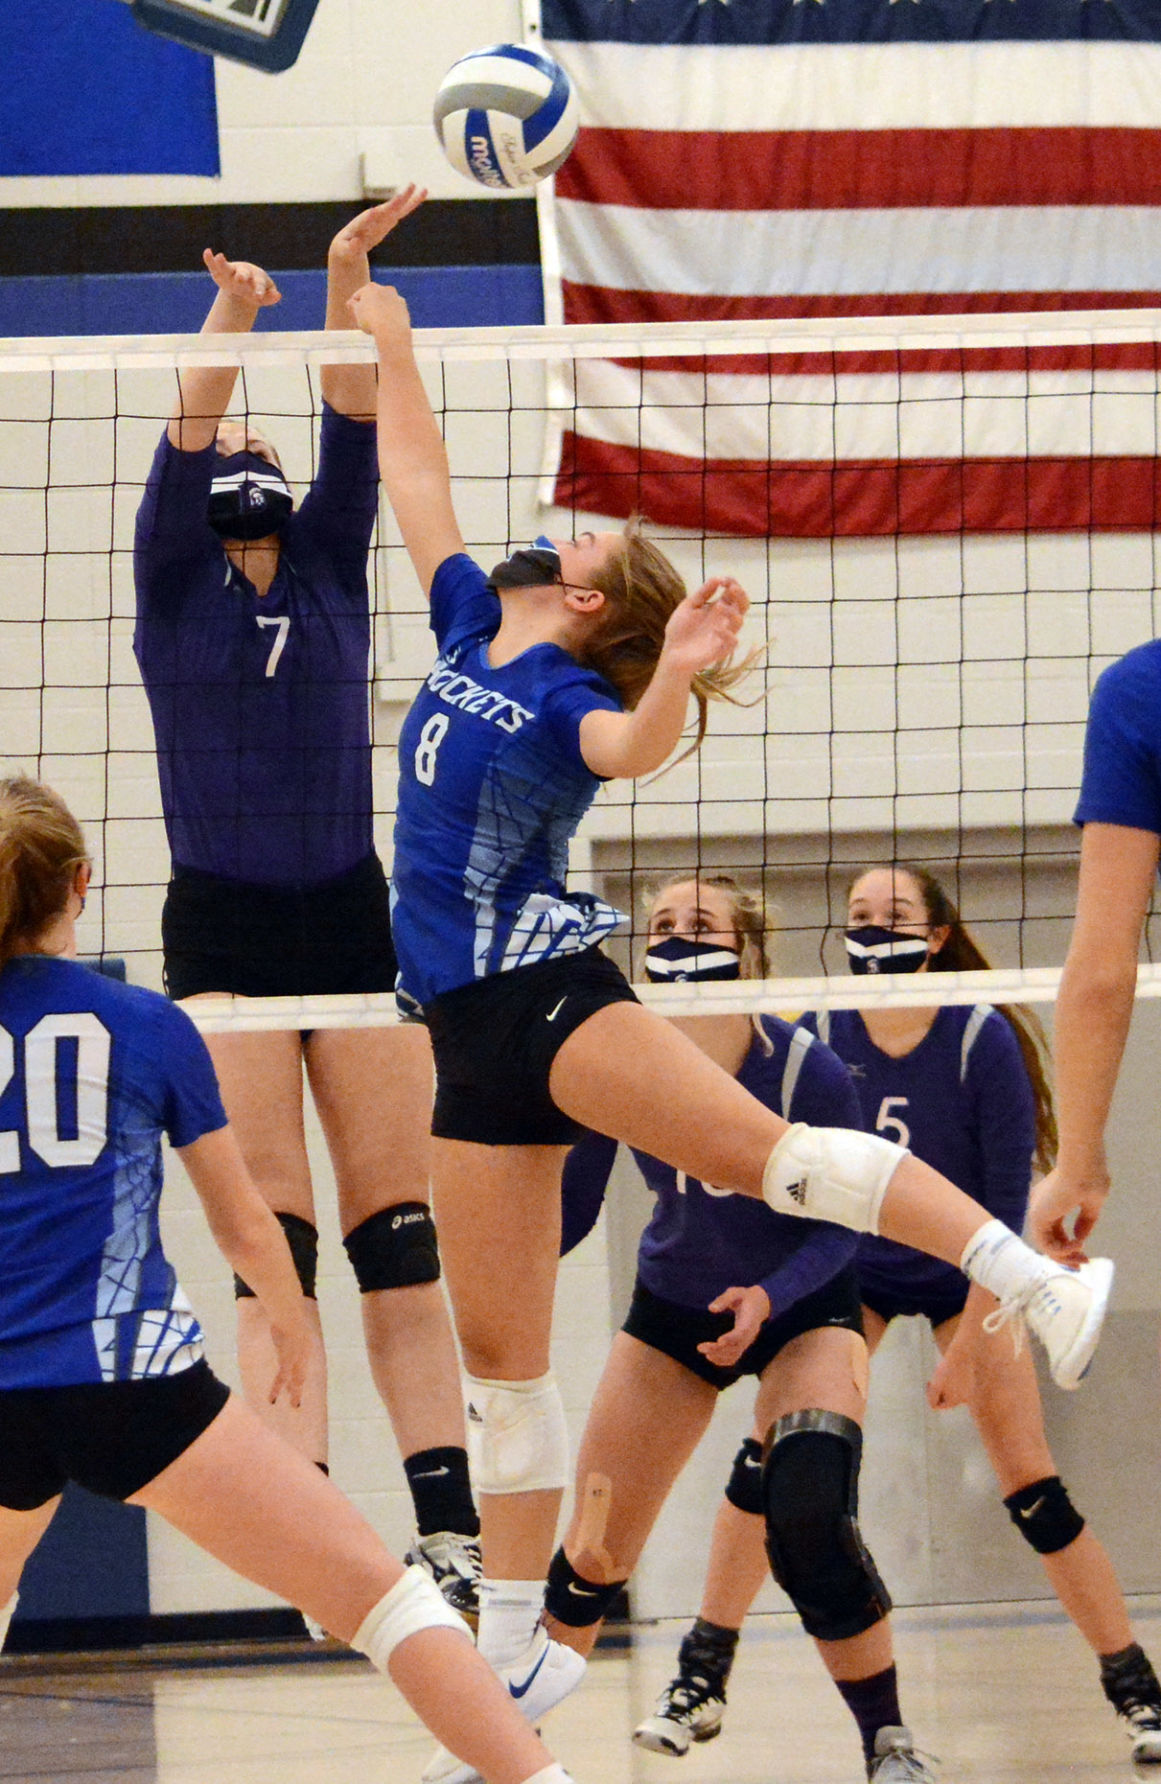 Randolph girls volleyball fueled this fall by last seasons early postseason